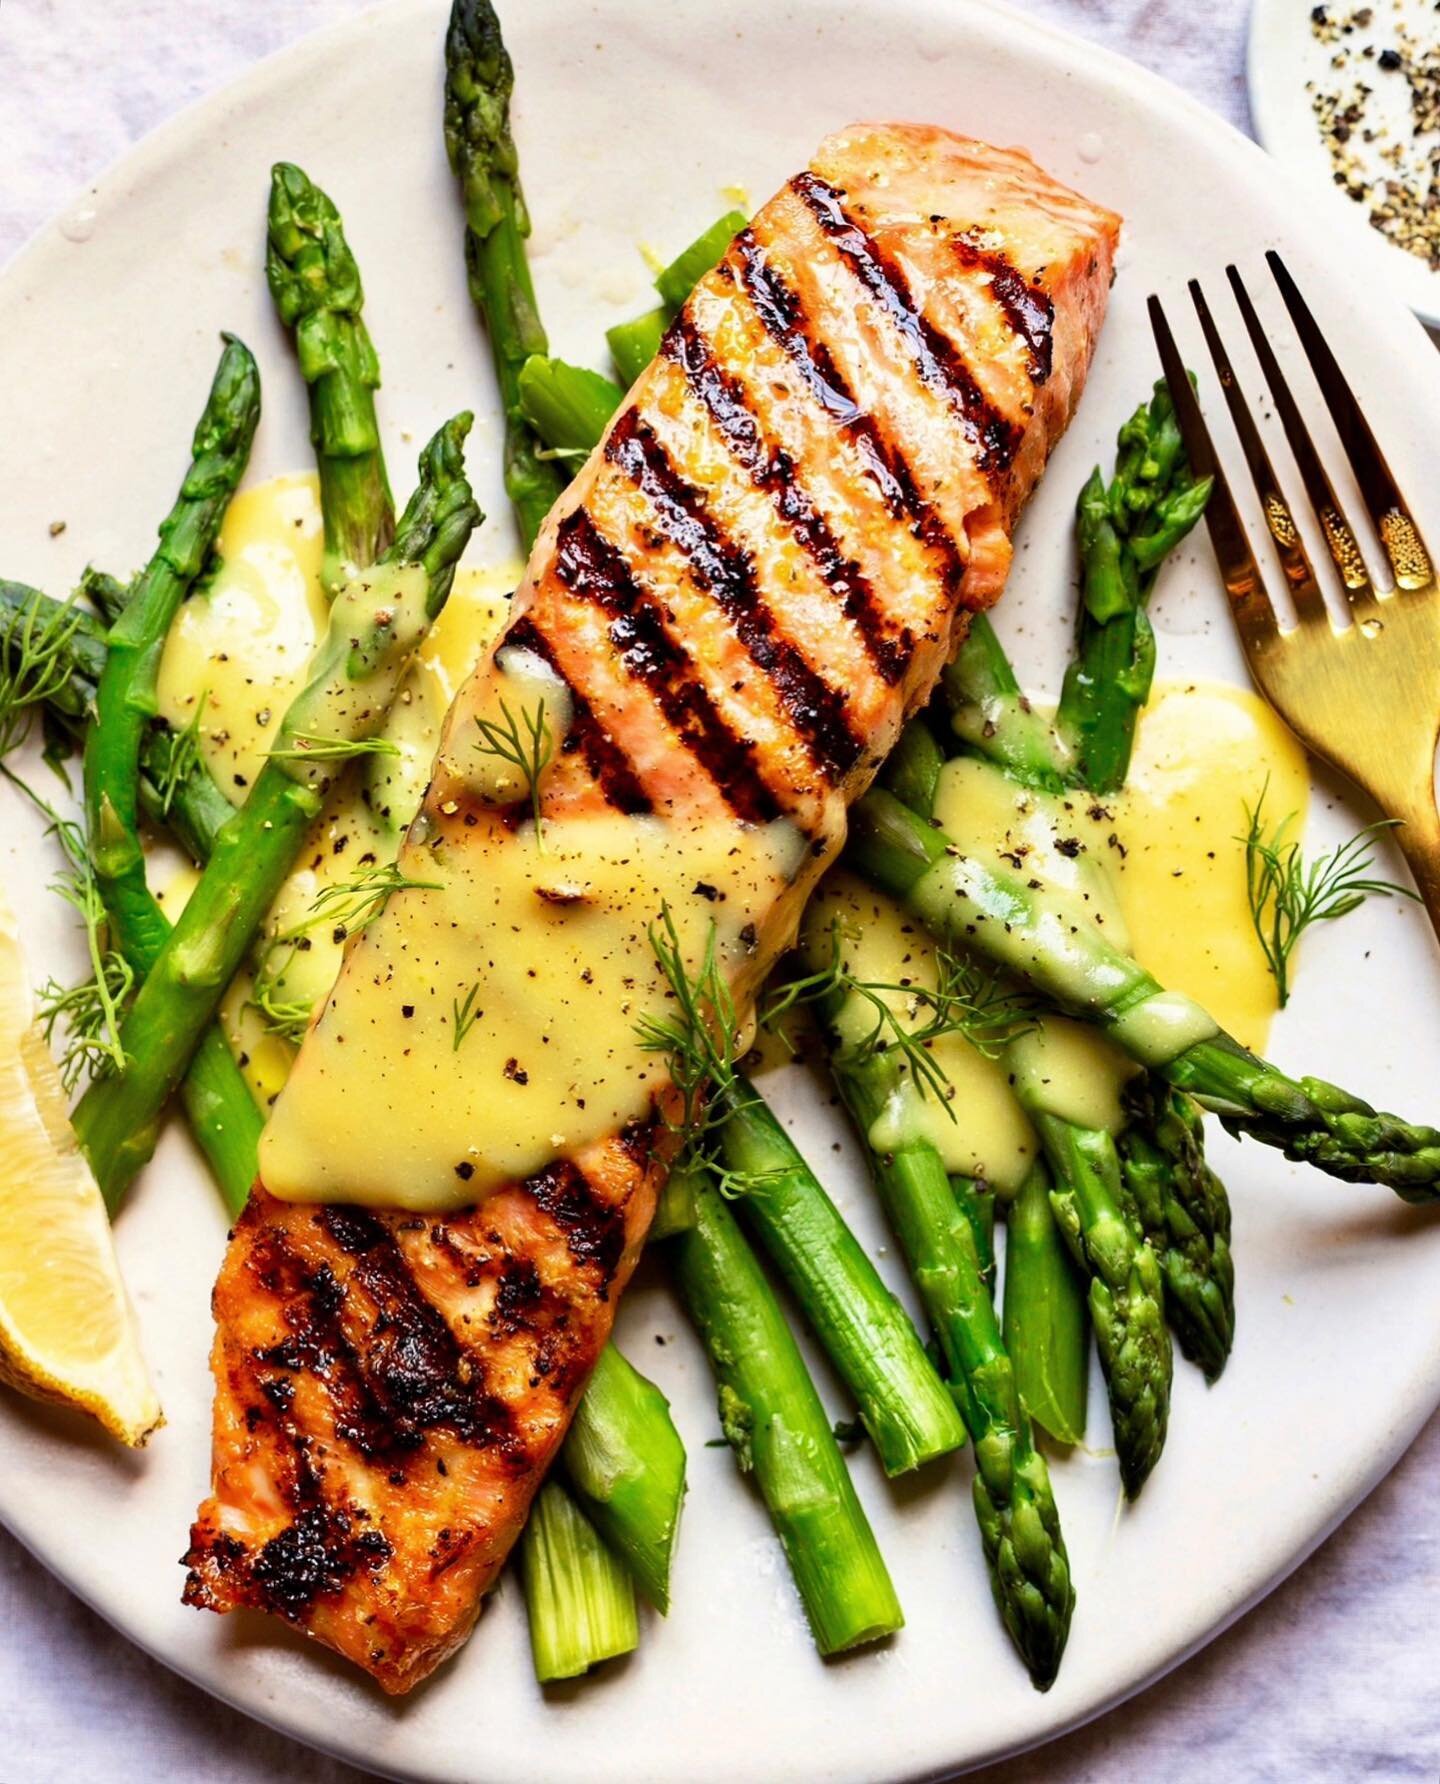 Some spring dinner inspo! This is a delicious way to enjoy trout or salmon with all the asparagus popping up. Season a filet of salmon with salt &amp; pepper, rub the fish itself with olive oil, and grill. Meanwhile steam some asparagus &amp; make a 